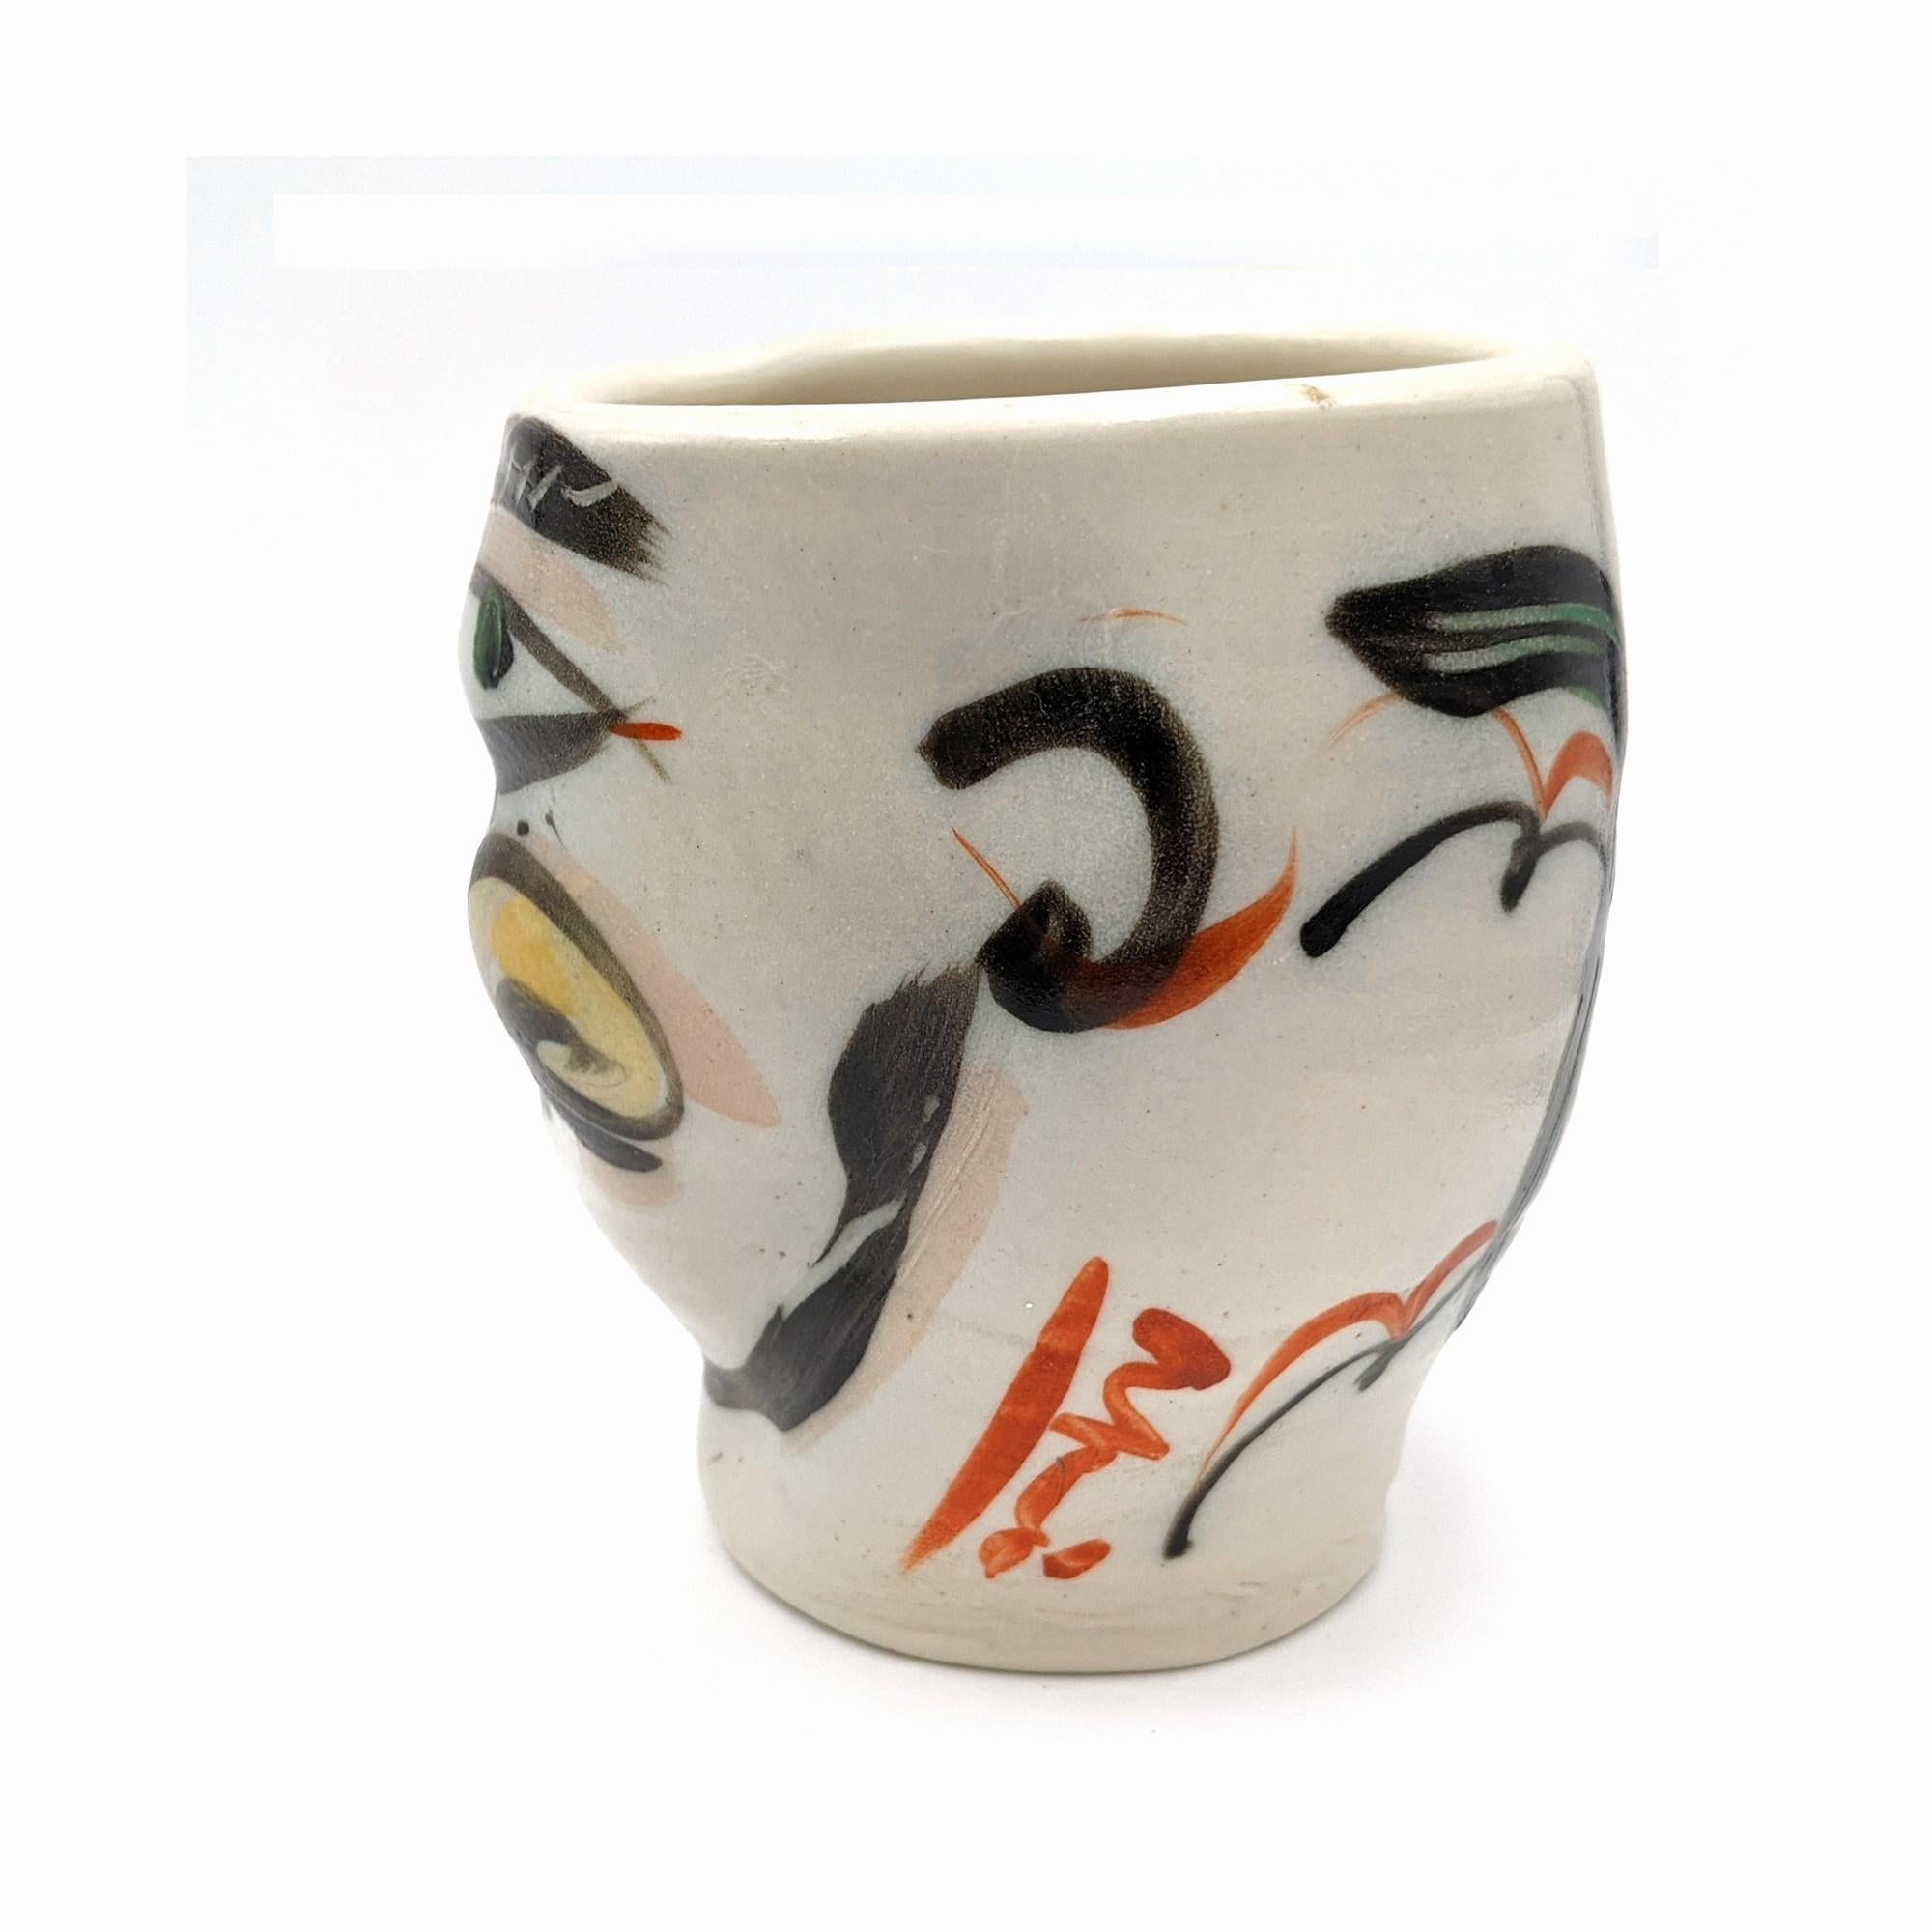 Cup II - Abstract Expressionist Sculpture by Akio Takamori